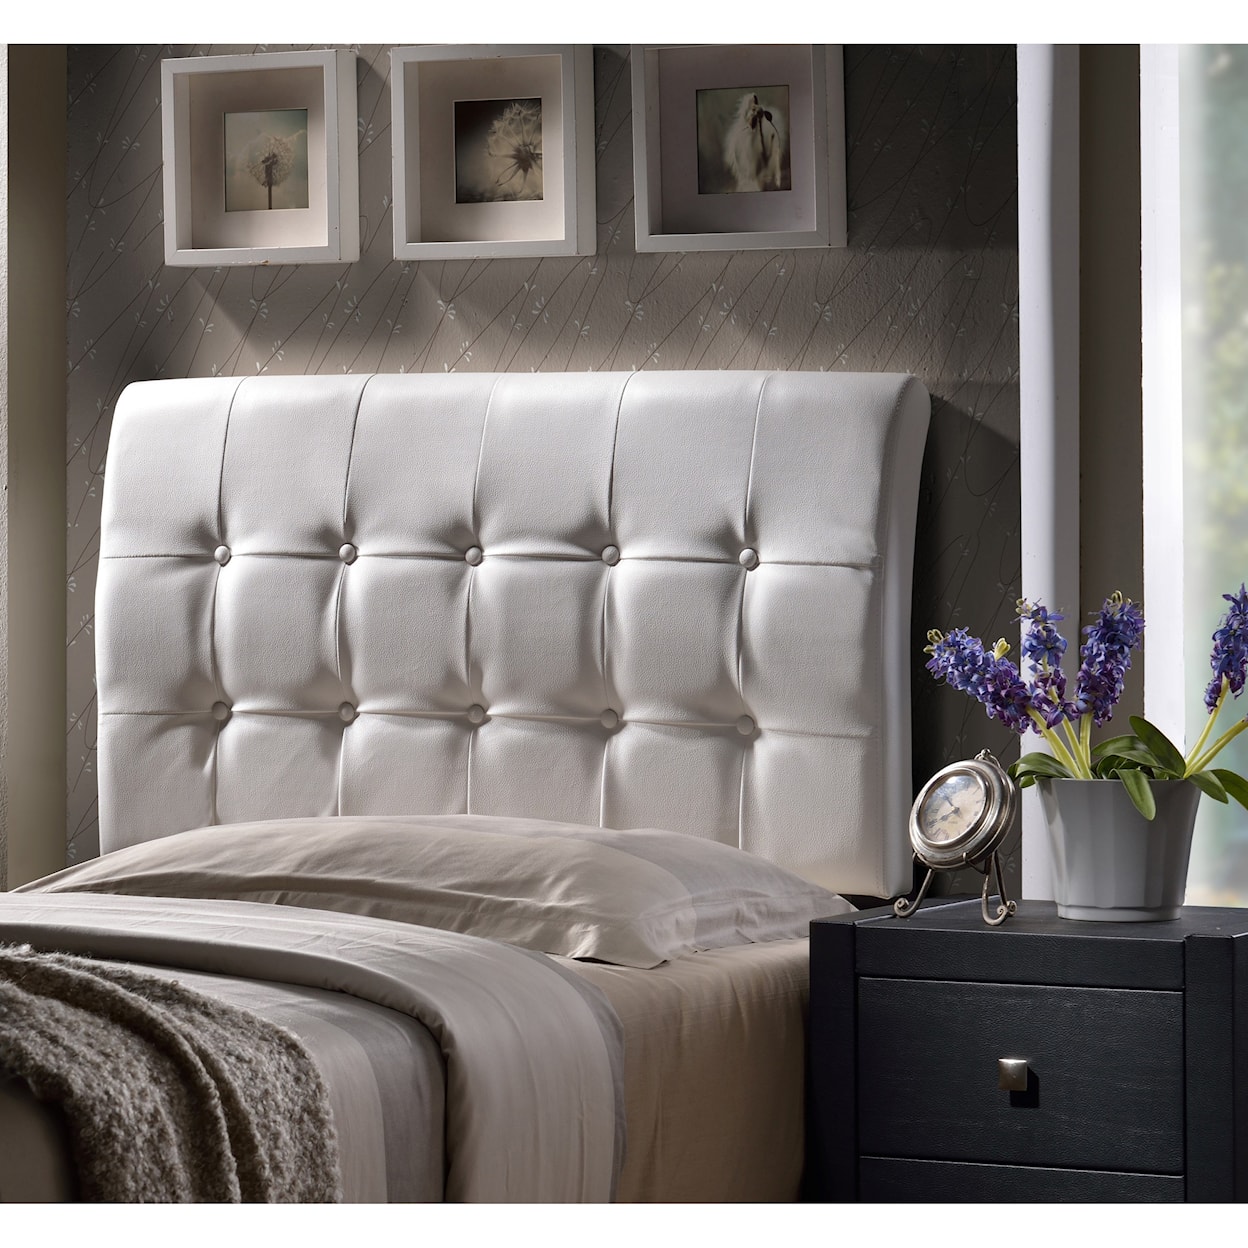 Hillsdale Lusso Lusso Queen Headboard with Frame